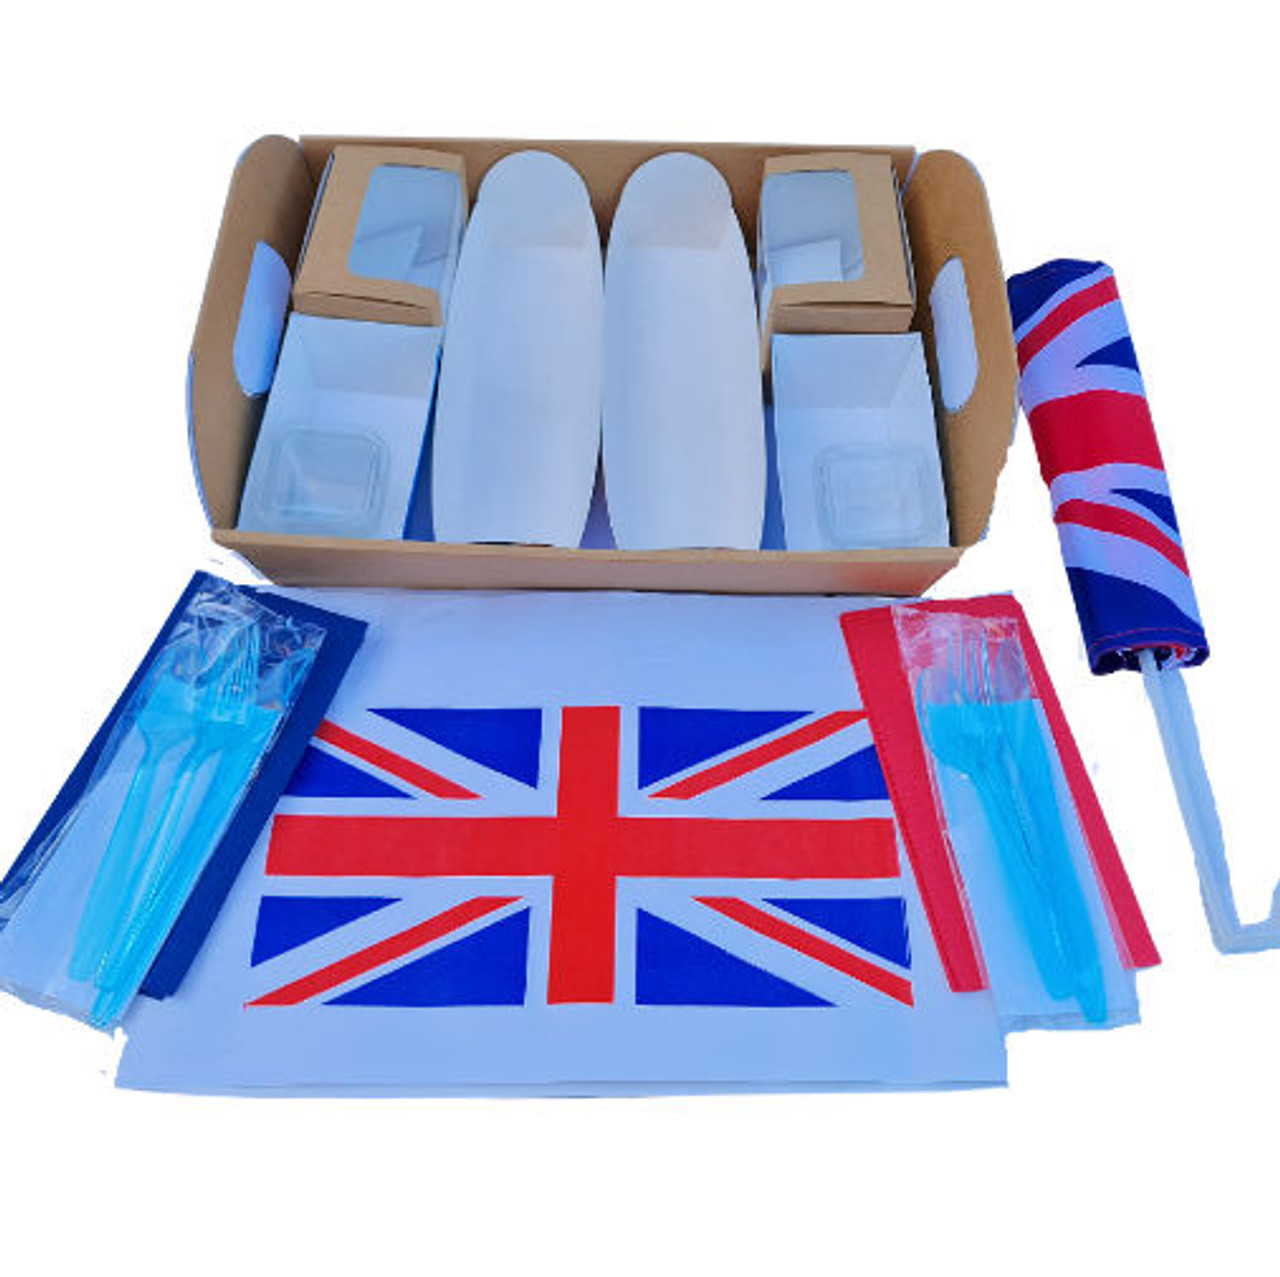 Pack of 10 Union Jack Coronation Hamper Tray for Two includes Bakery Trays, Baguette trays, Sandwich Boxes, Place mats, Cutlery, Napkin, portion pots and flag